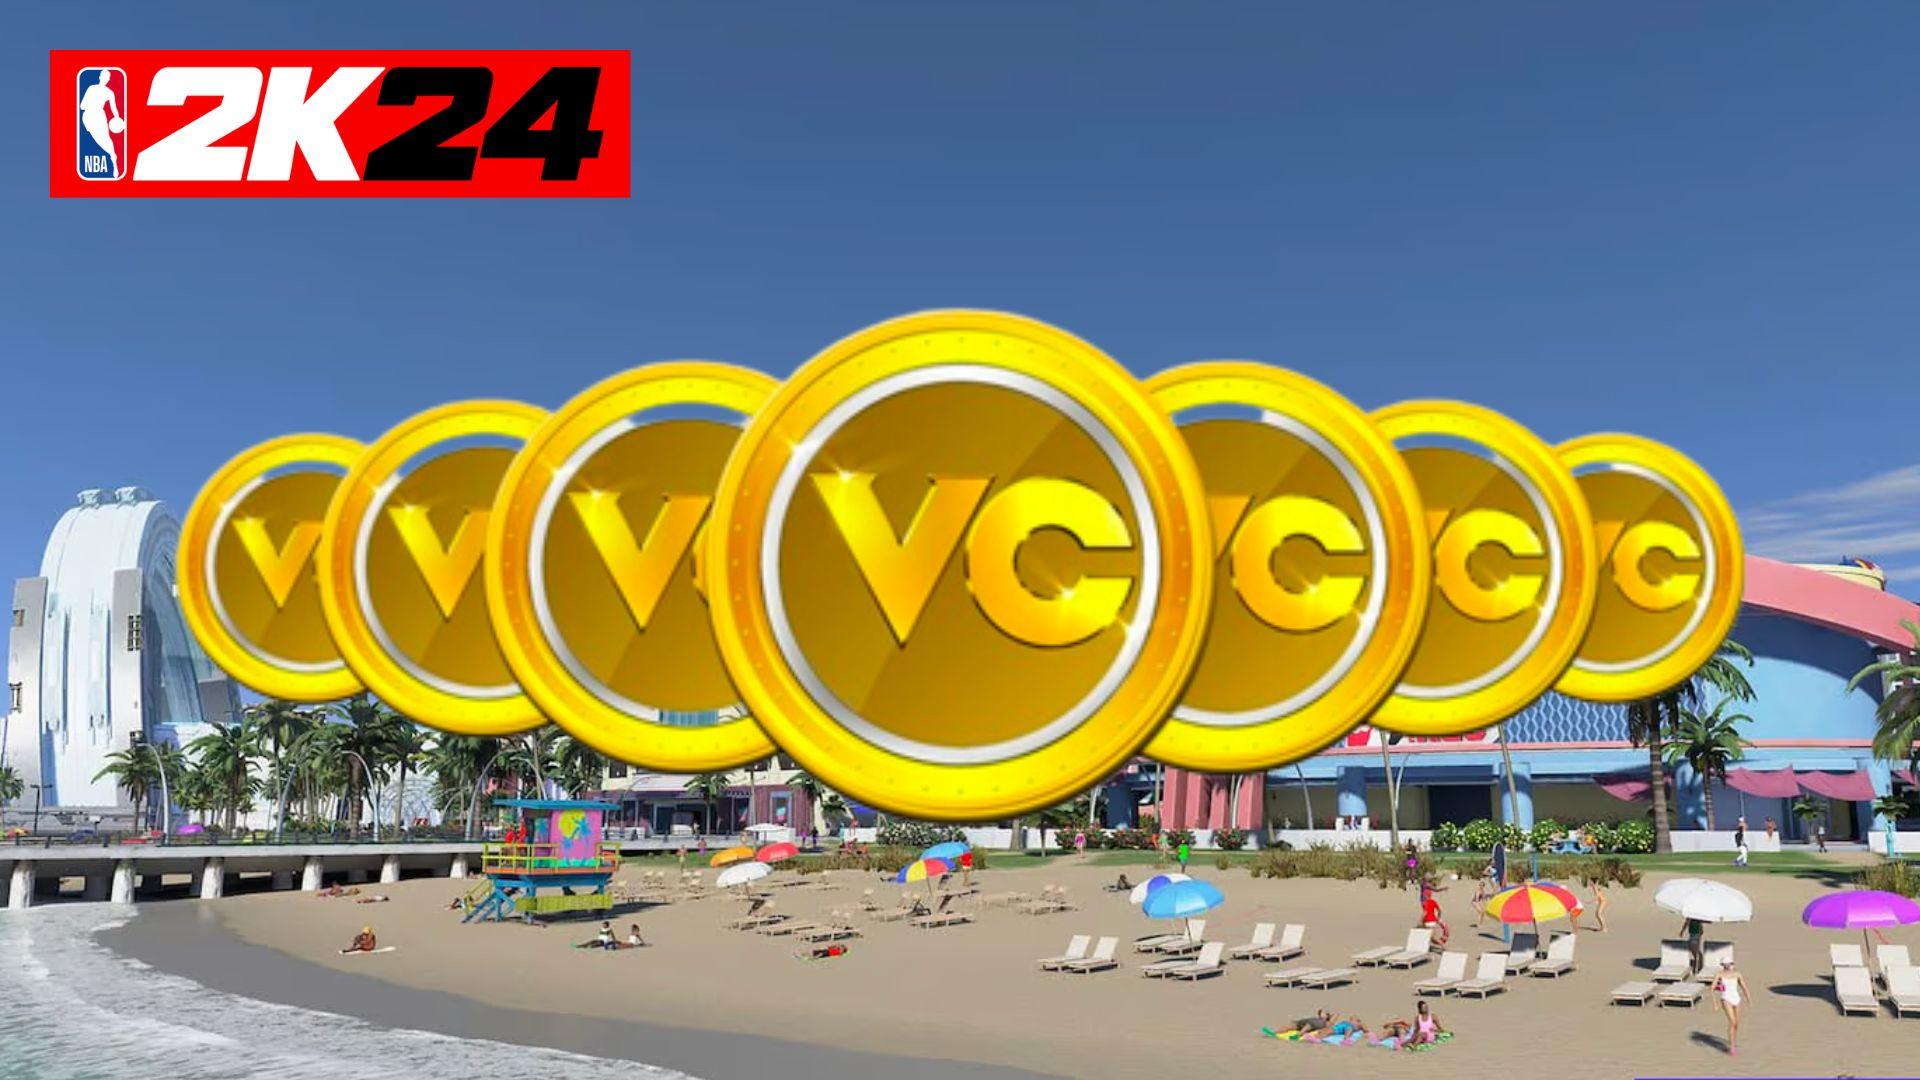 NBA 2K24 VC and logo on top of beach setting in The City